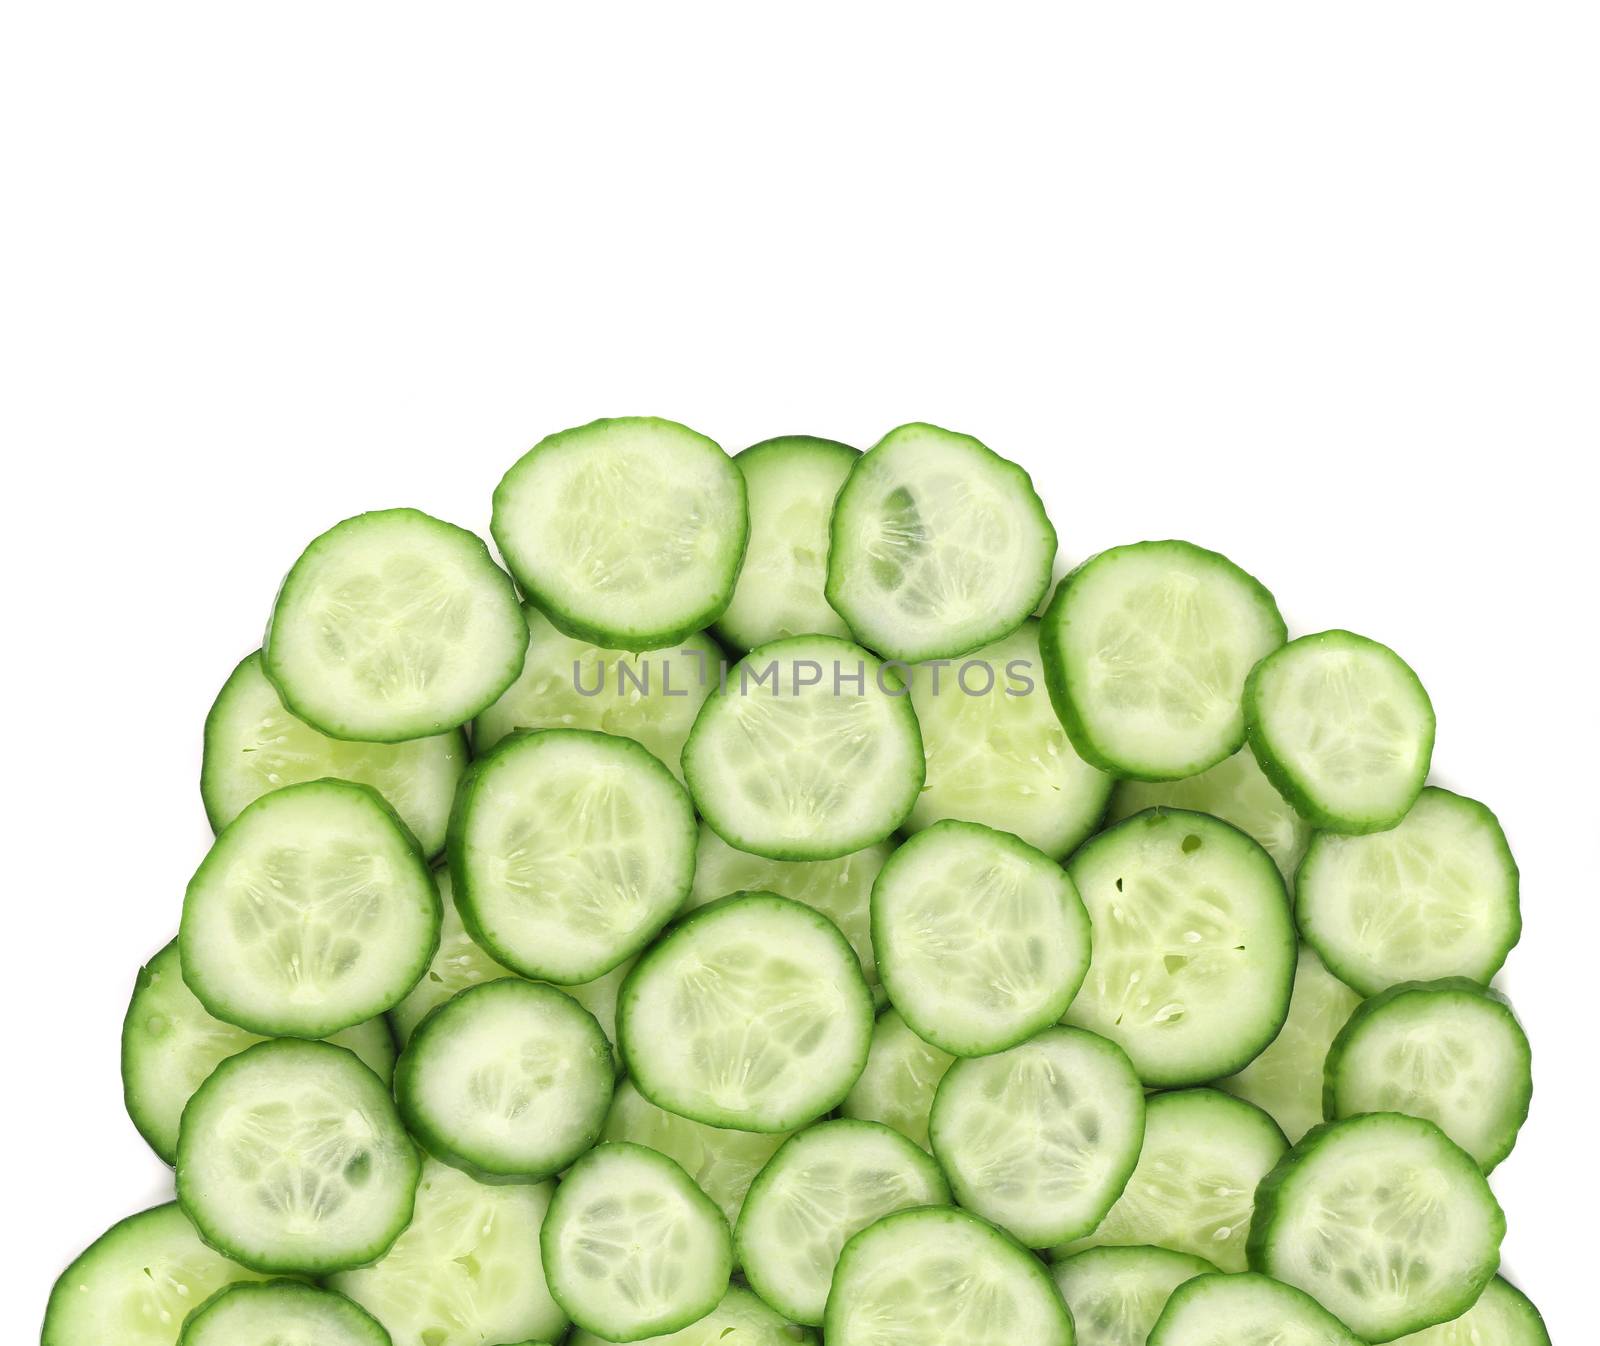 Fresh cucumber slices. Isolated on a white background.